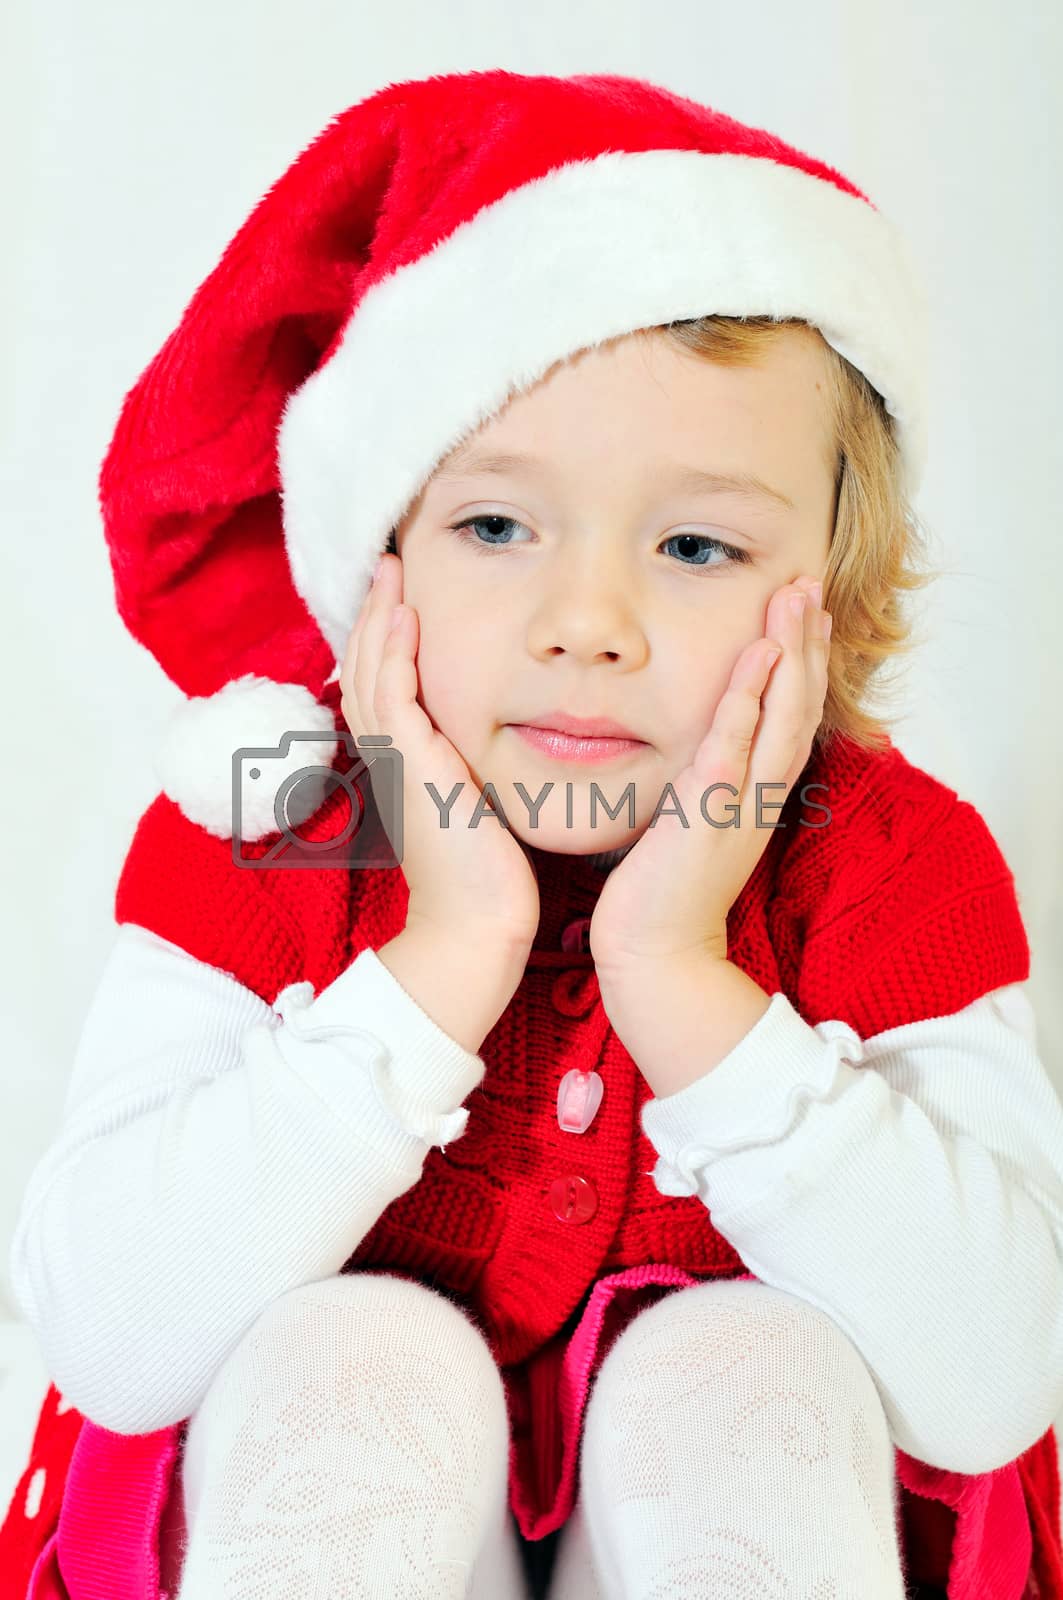 Royalty free image of thoughtful santa helper by Reana